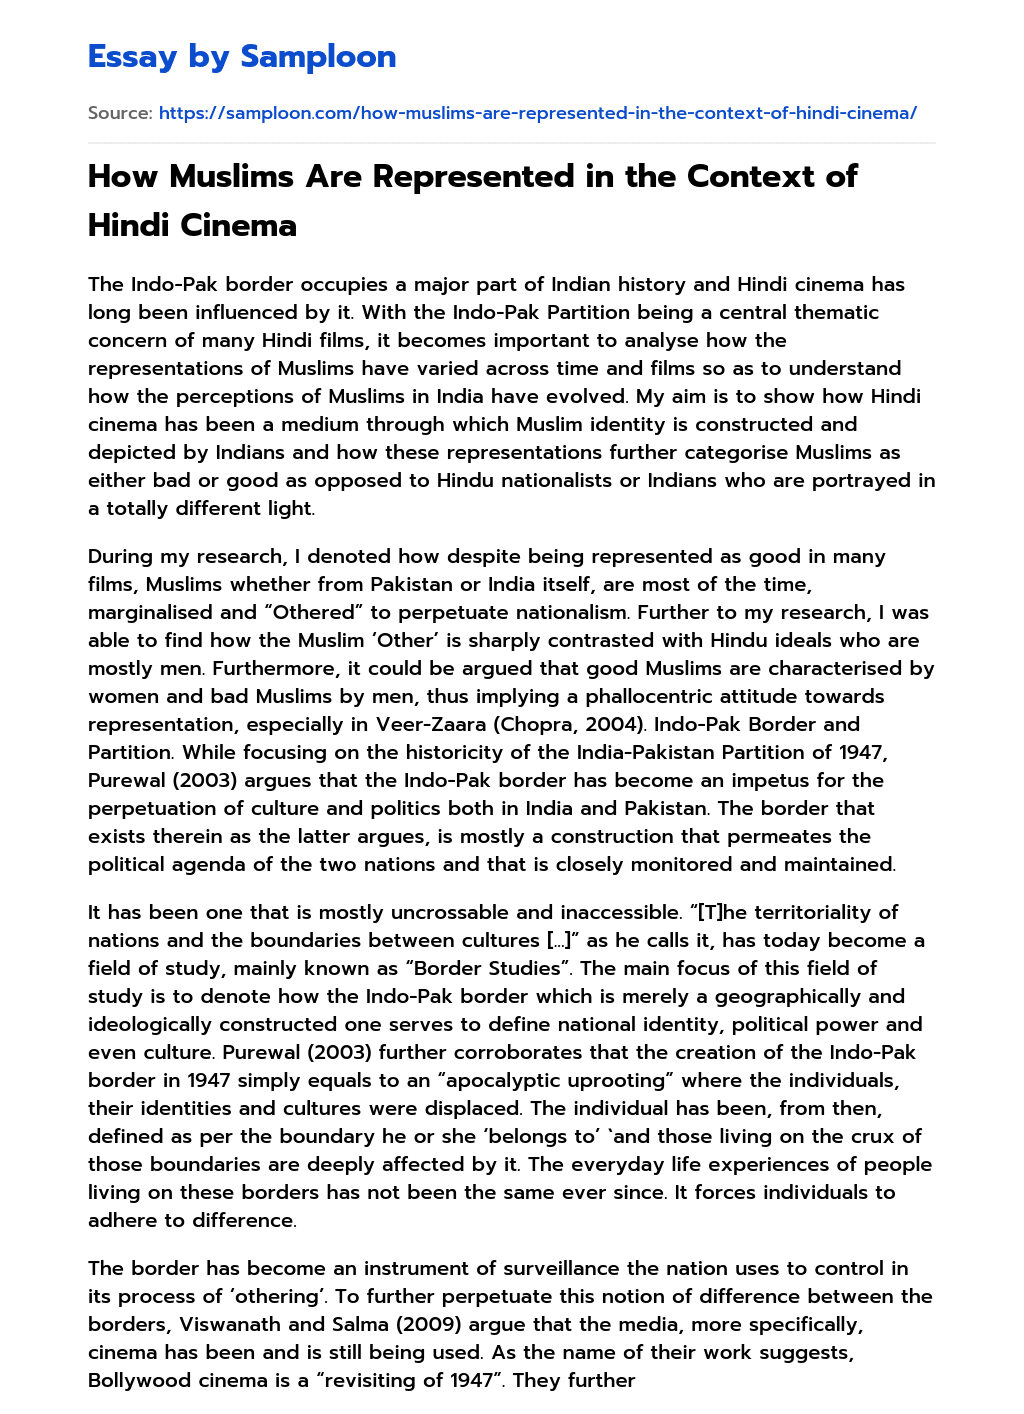 How Muslims Are Represented in the Context of Hindi Cinema essay